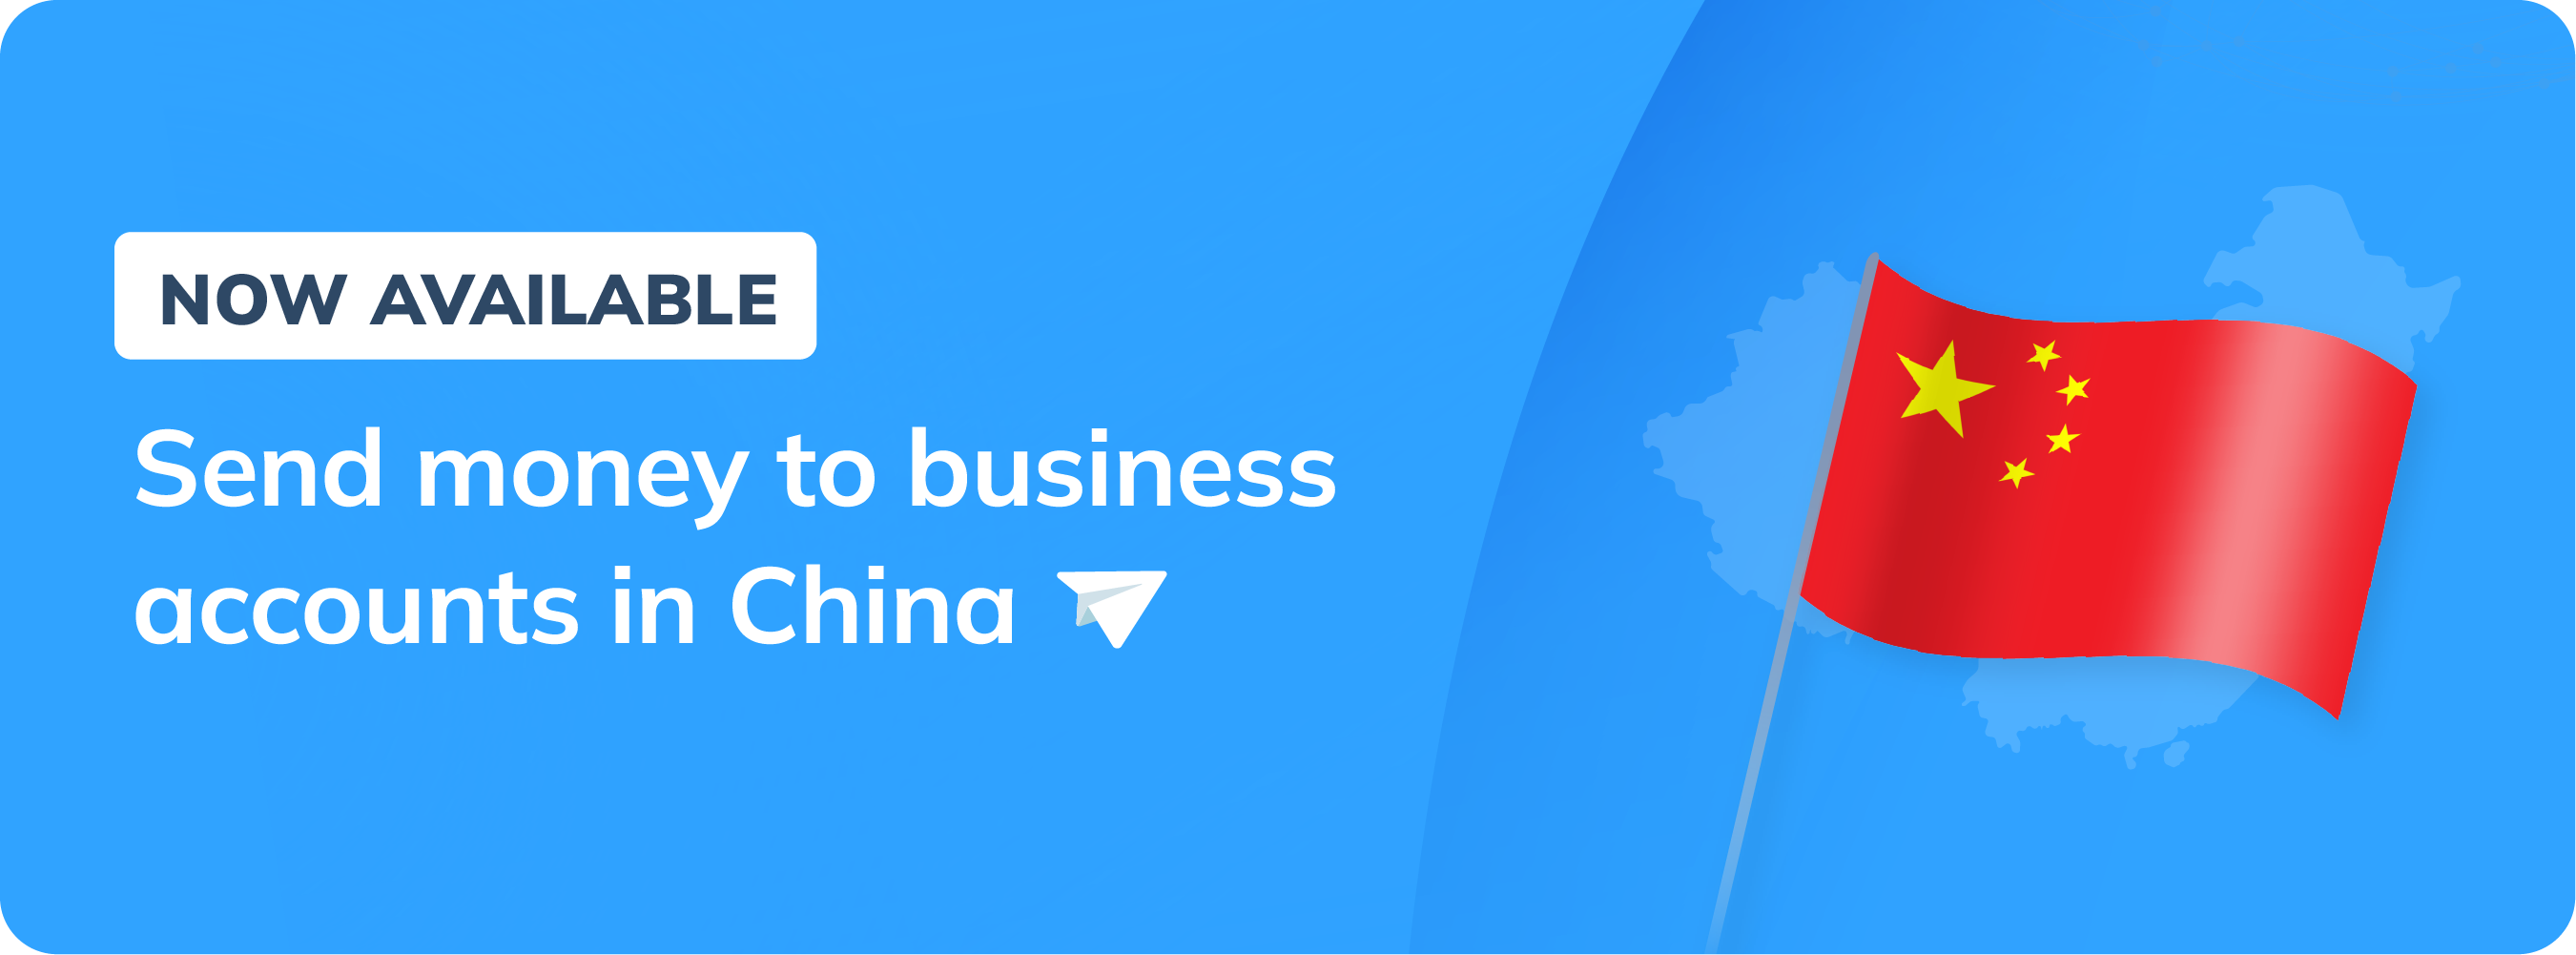 send money to business accounts in China